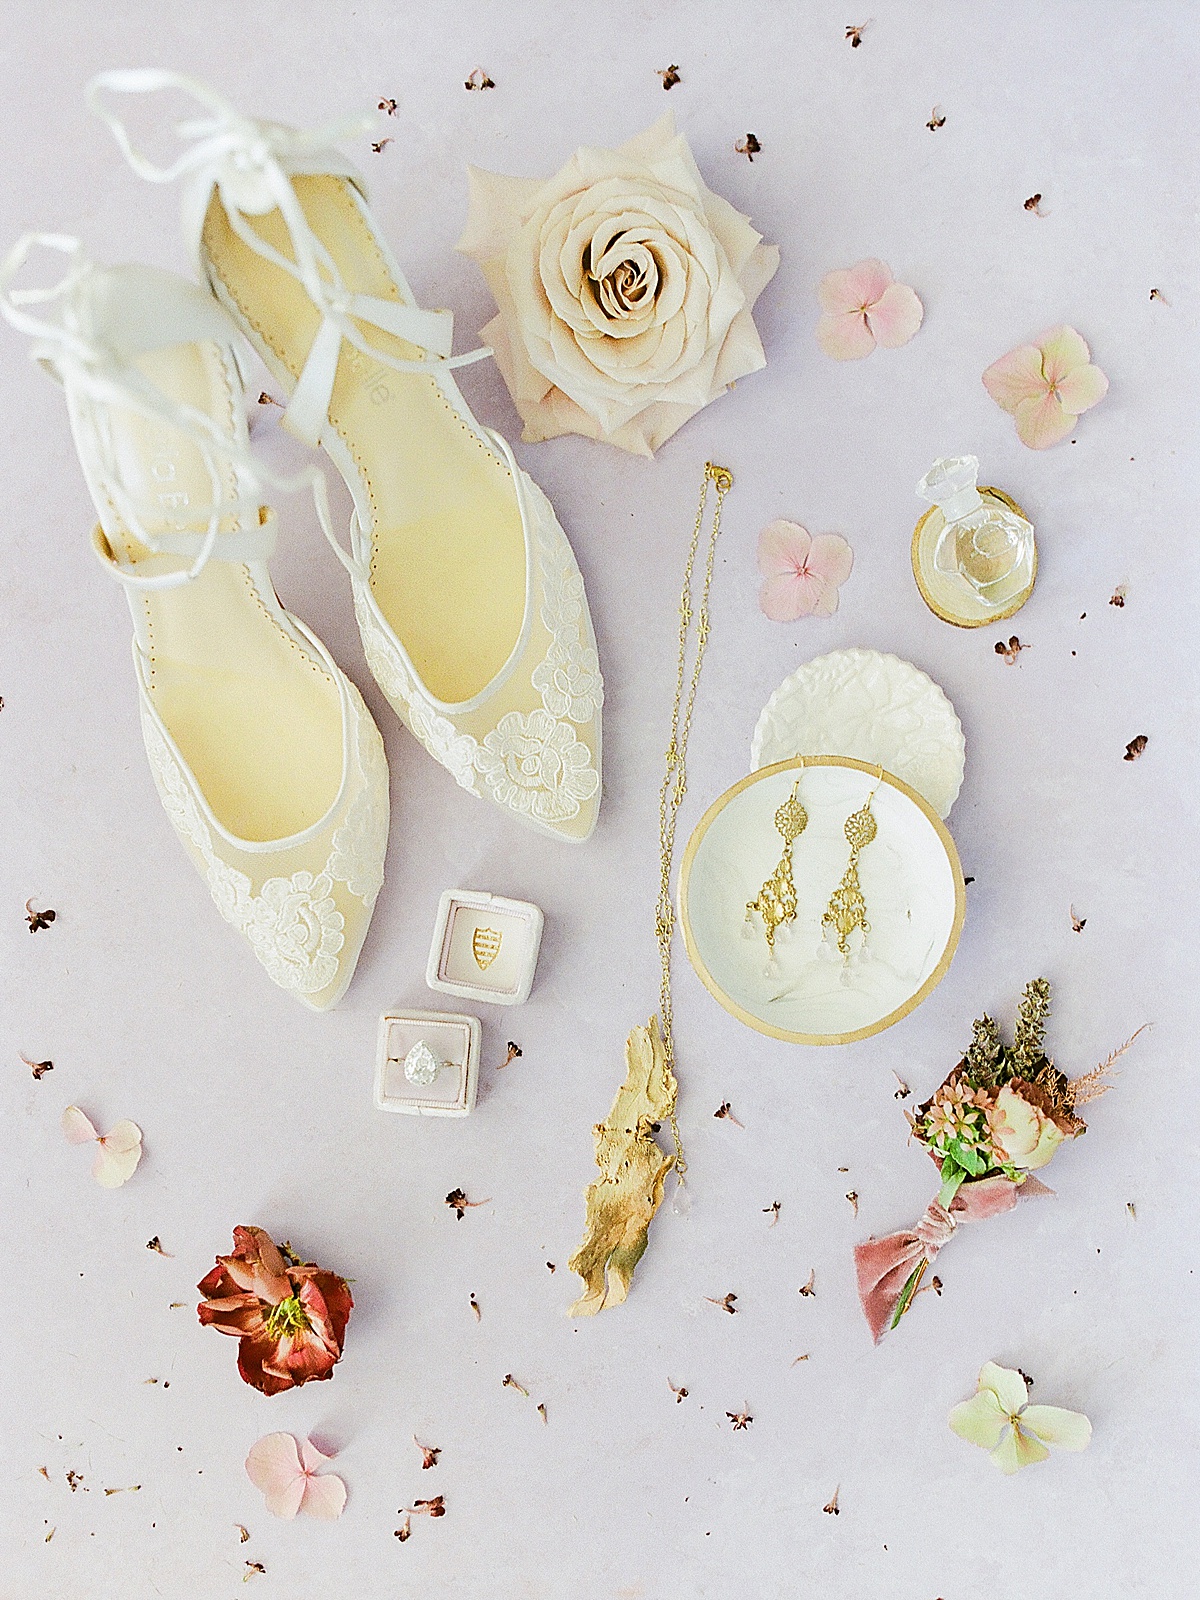 Bridal Details Shoes Ring Jewelry and Flowers Photo 